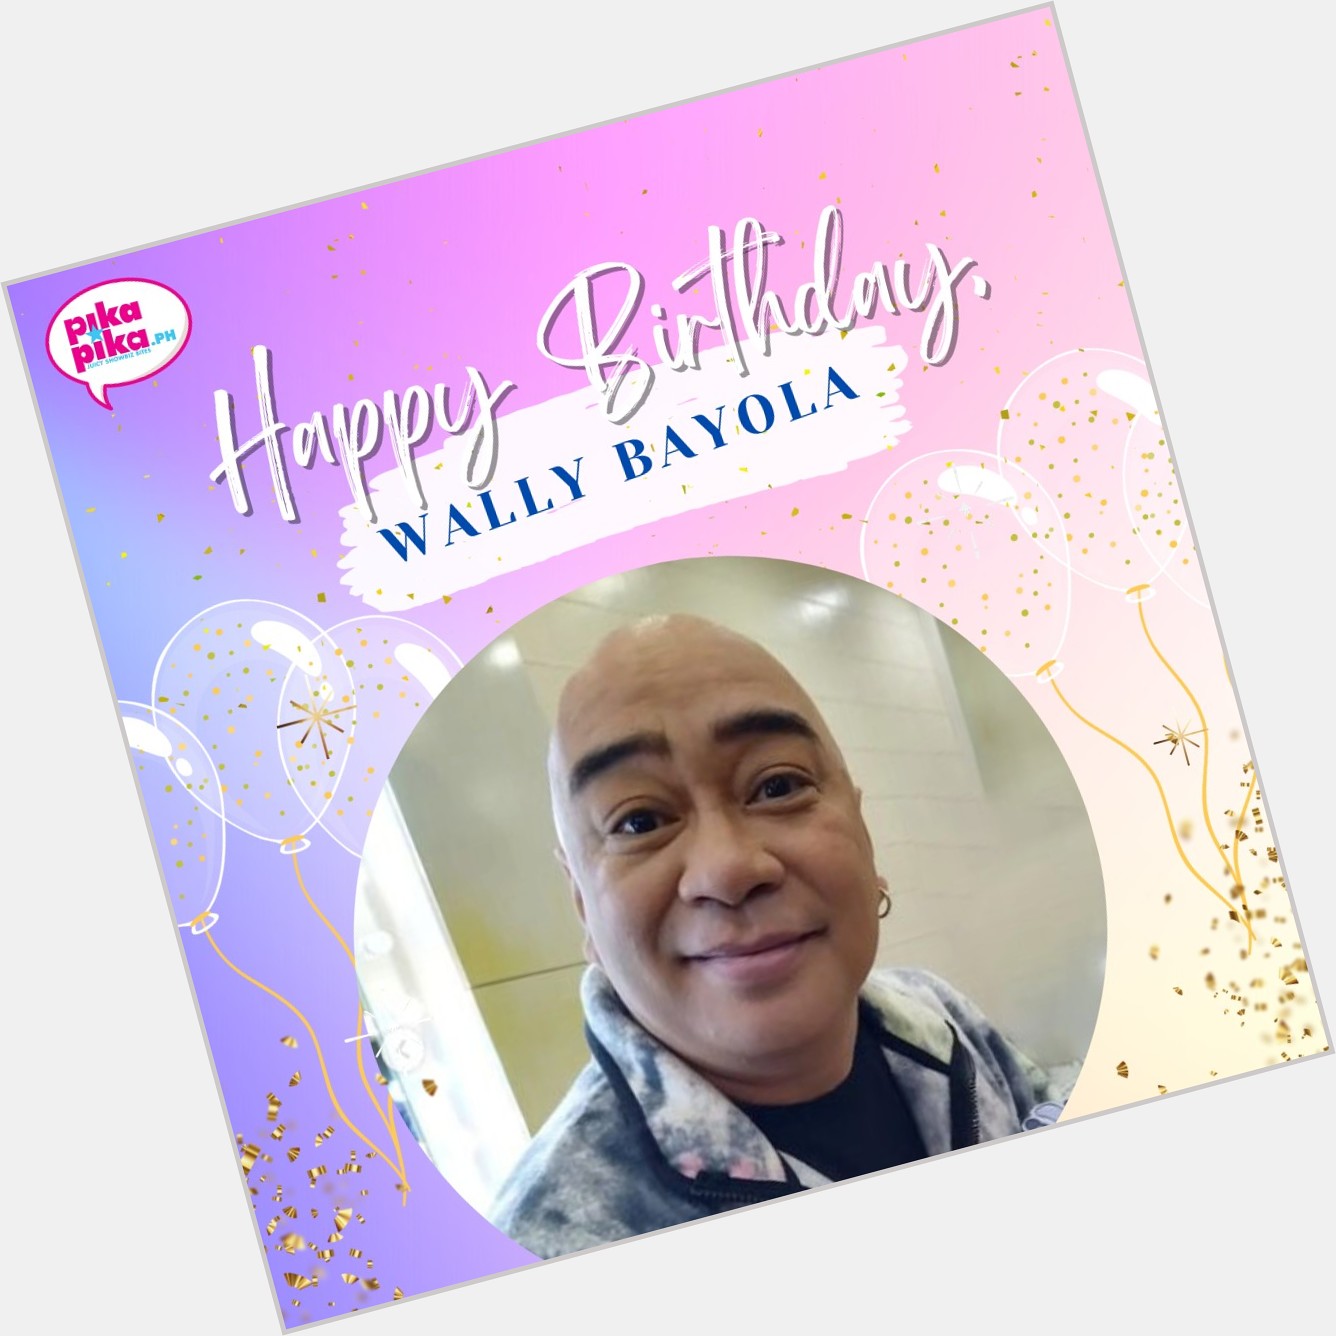 Happy birthday, Wally Bayola! May your special day be filled with love and cheers.    